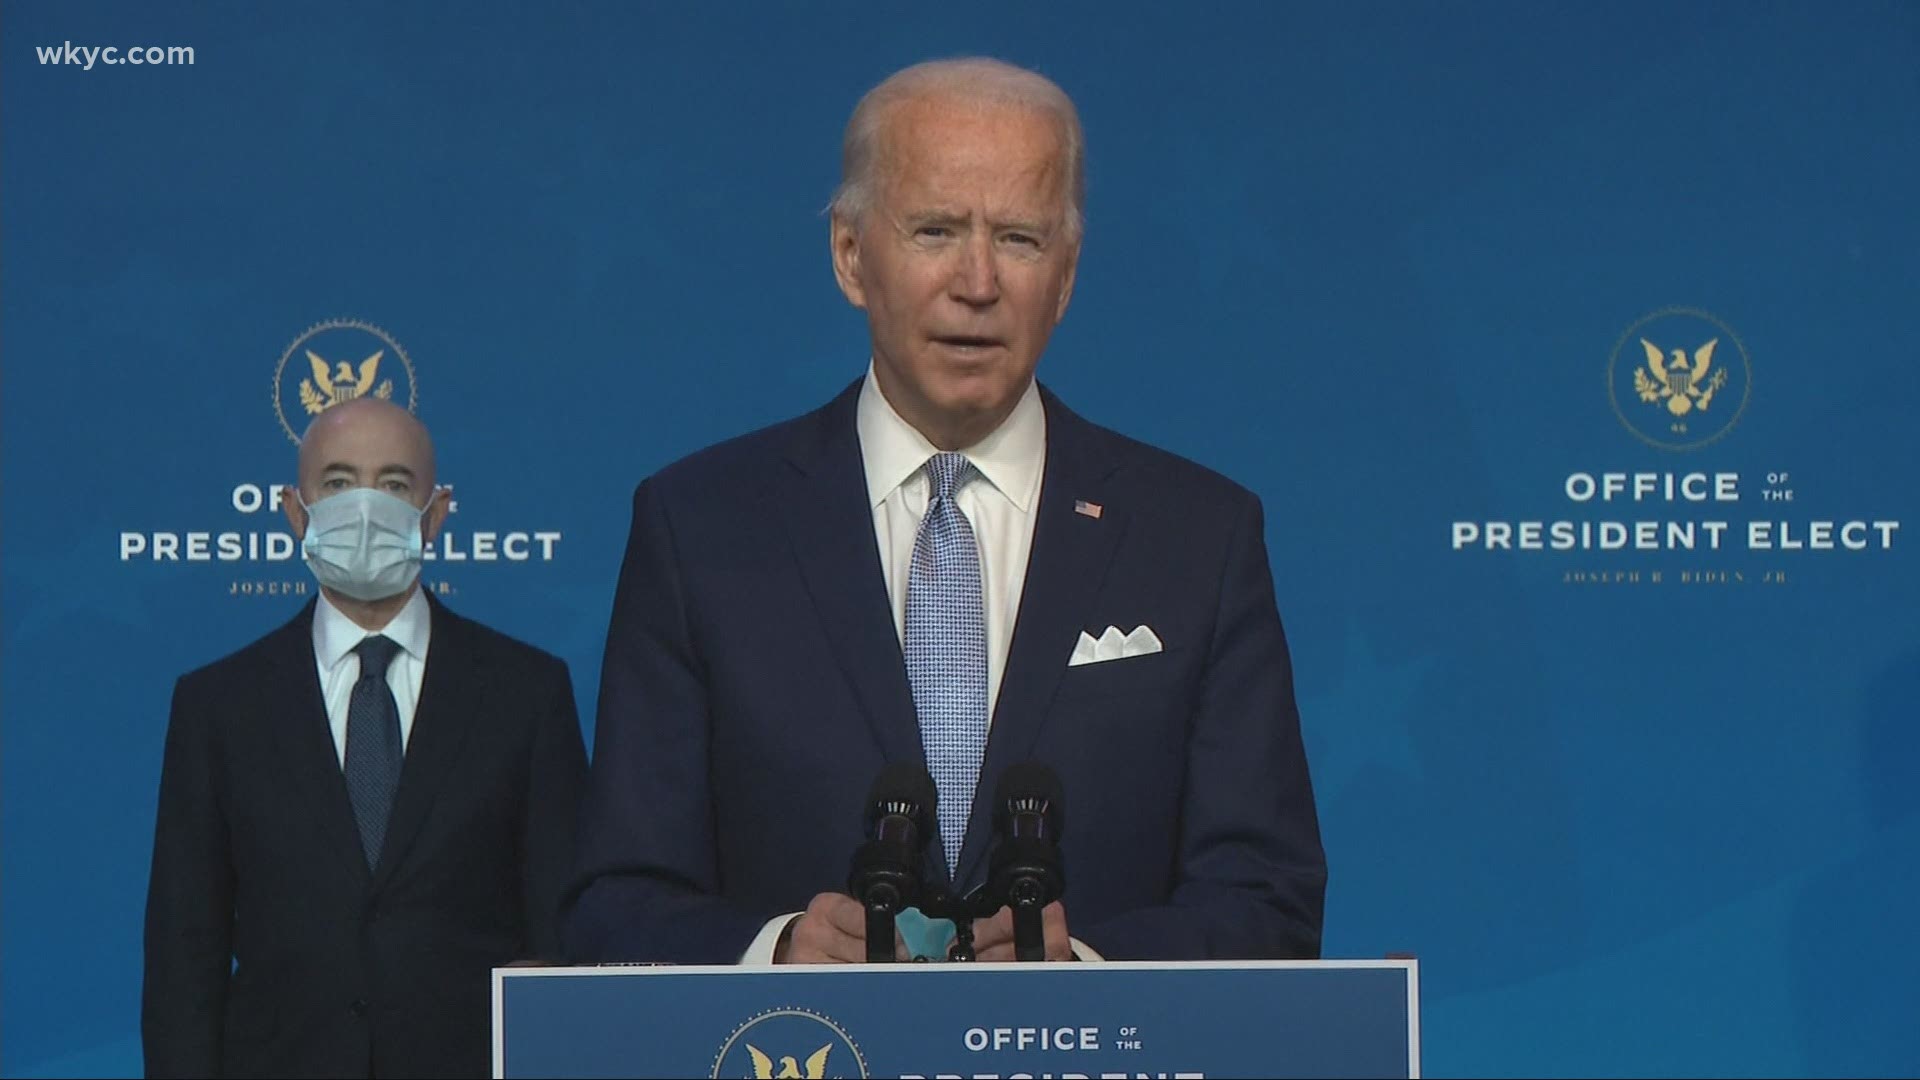 America is back.  Those were the words from Joe Biden as he formally introduced their national security team and Cabinet members.